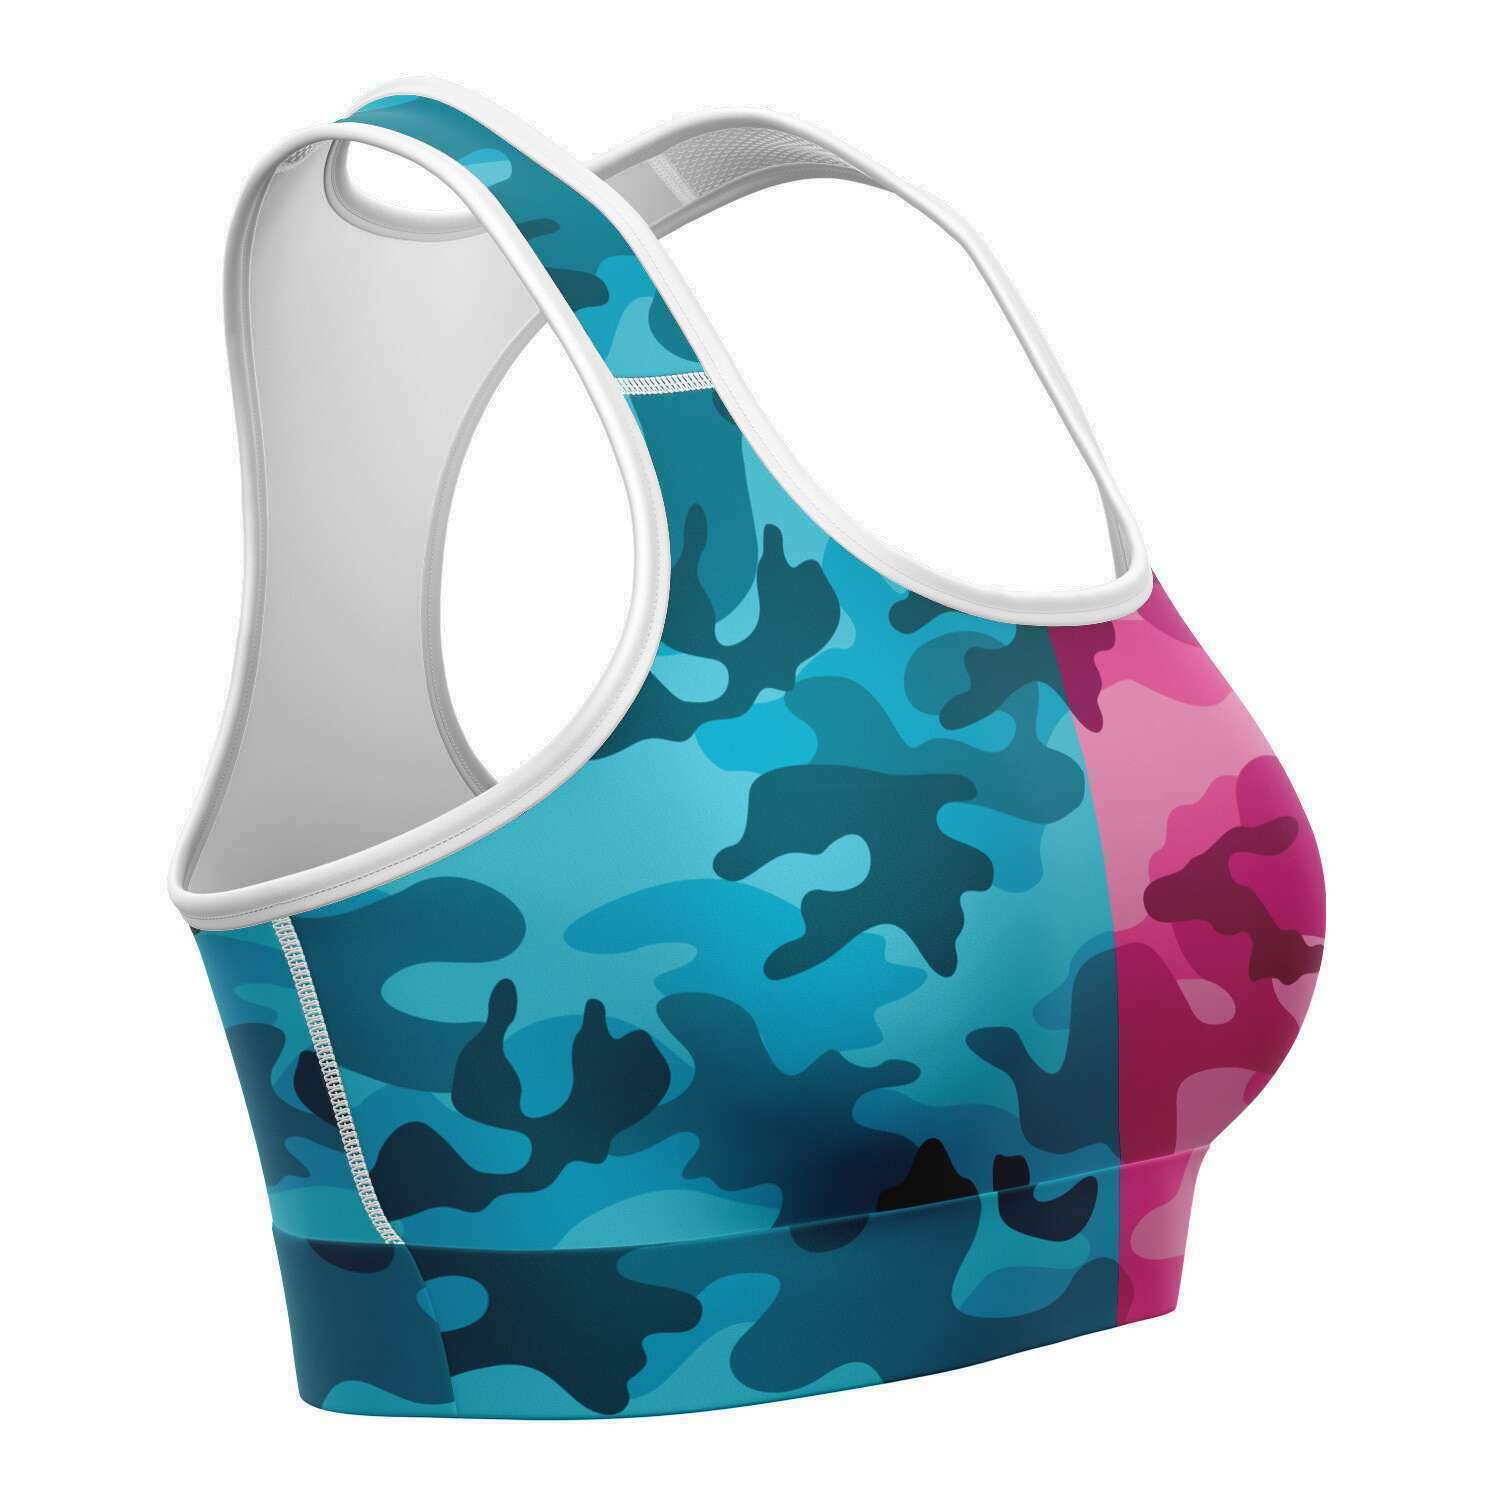 Women's All Cyan Pink Camouflage Athletic Sports Bra Right